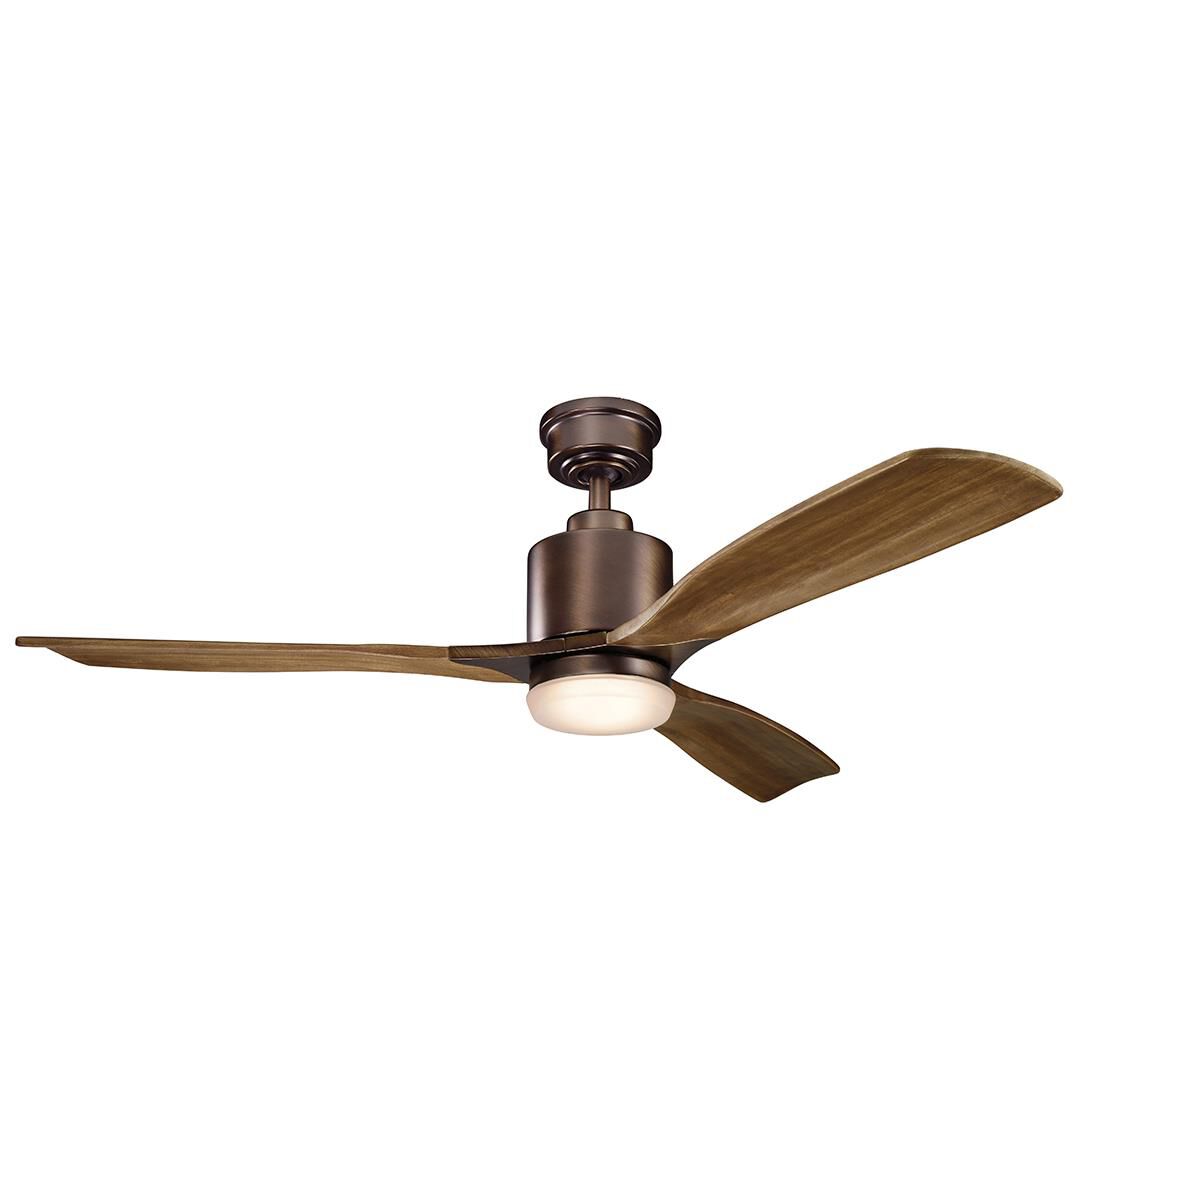 Photos - Fan Kichler Lighting Ridley 52 Inch Ceiling  with Light Kit Ridley - 300027 